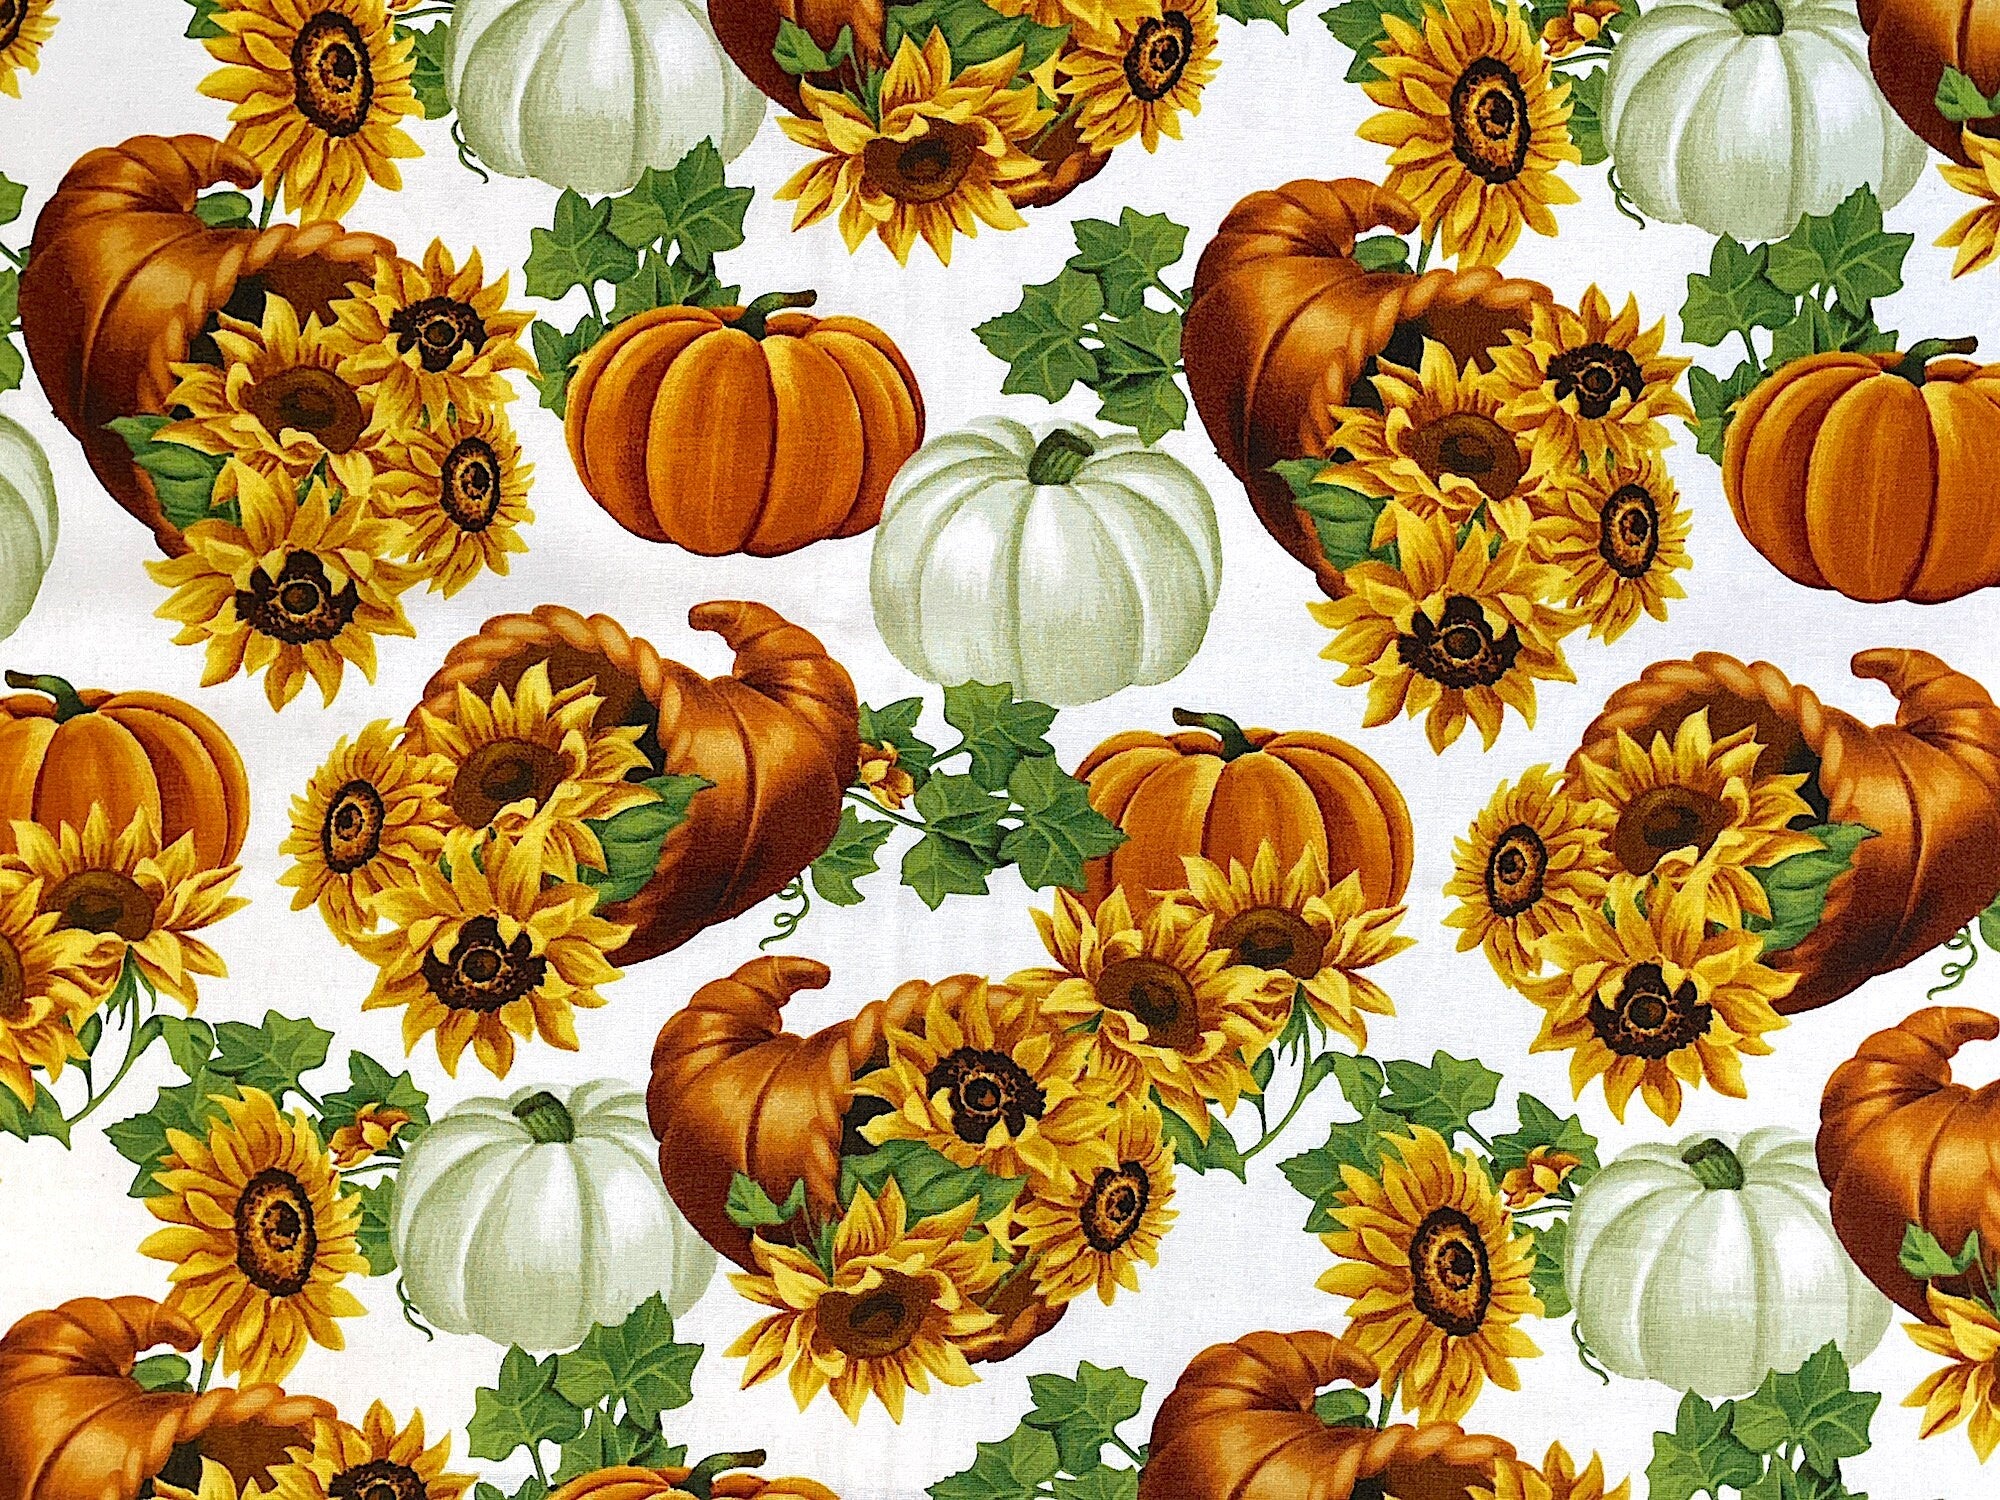 This cotton fabric is covered with cornucopia filled with sunflowers. There are also white and orange pumpkins and ivy throughout the fabric